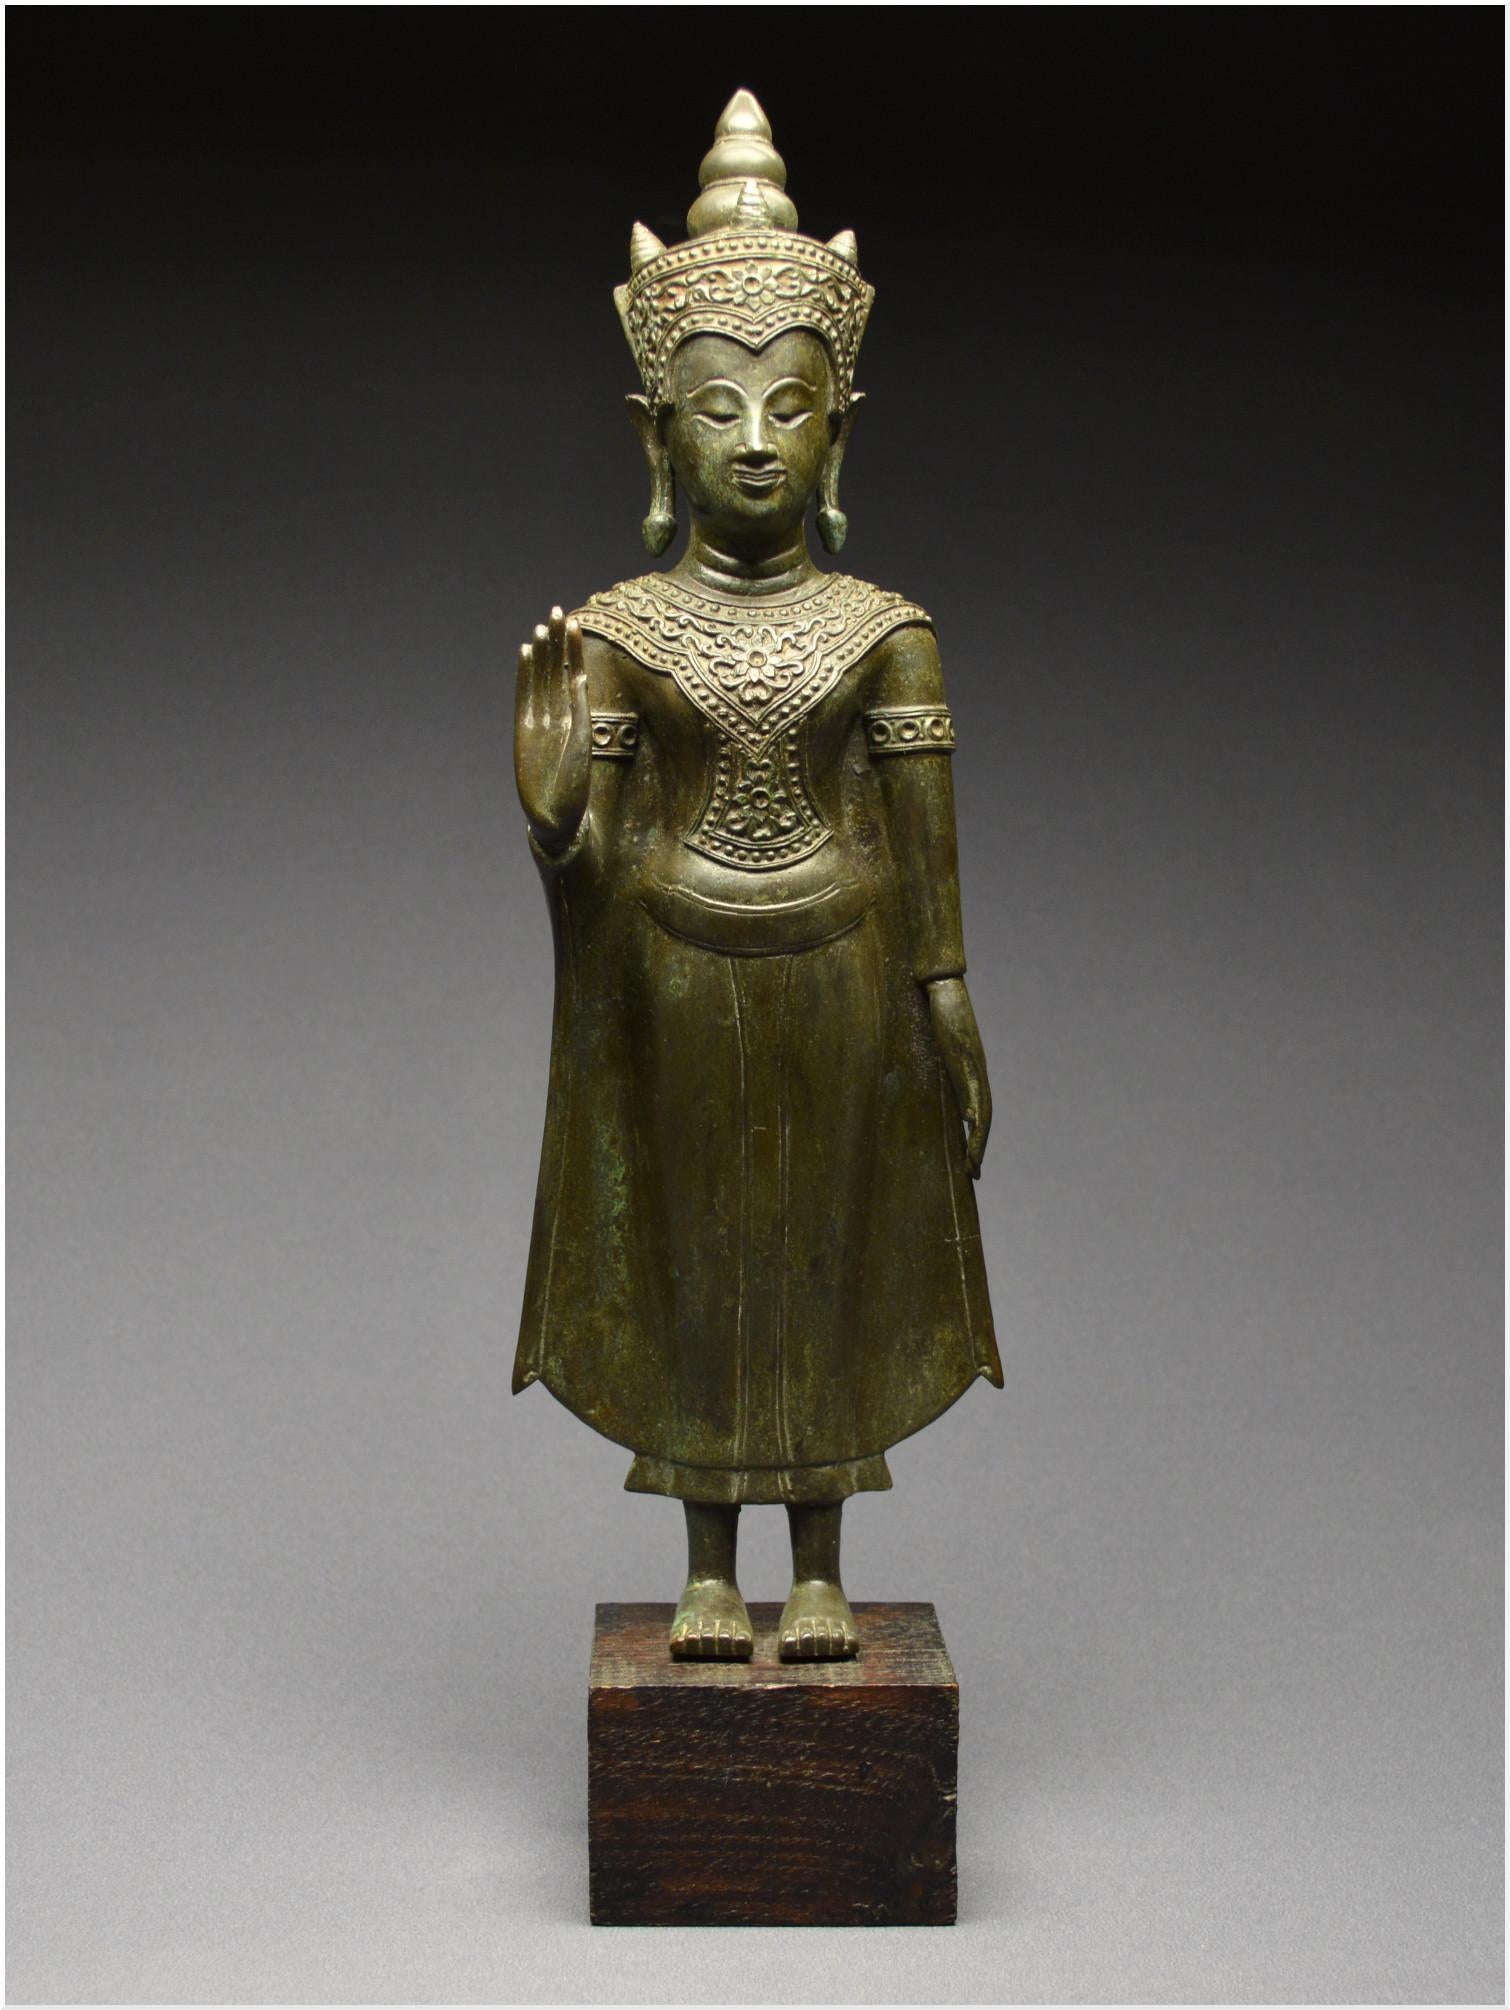 Bronze Buddha in the position of absence of fear

Ancient Kingdom of Siam
19th century

The Buddha is represented standing in the samapada position, the left arm along the body, the right arm bent, palm turned outwards in the position of absence of